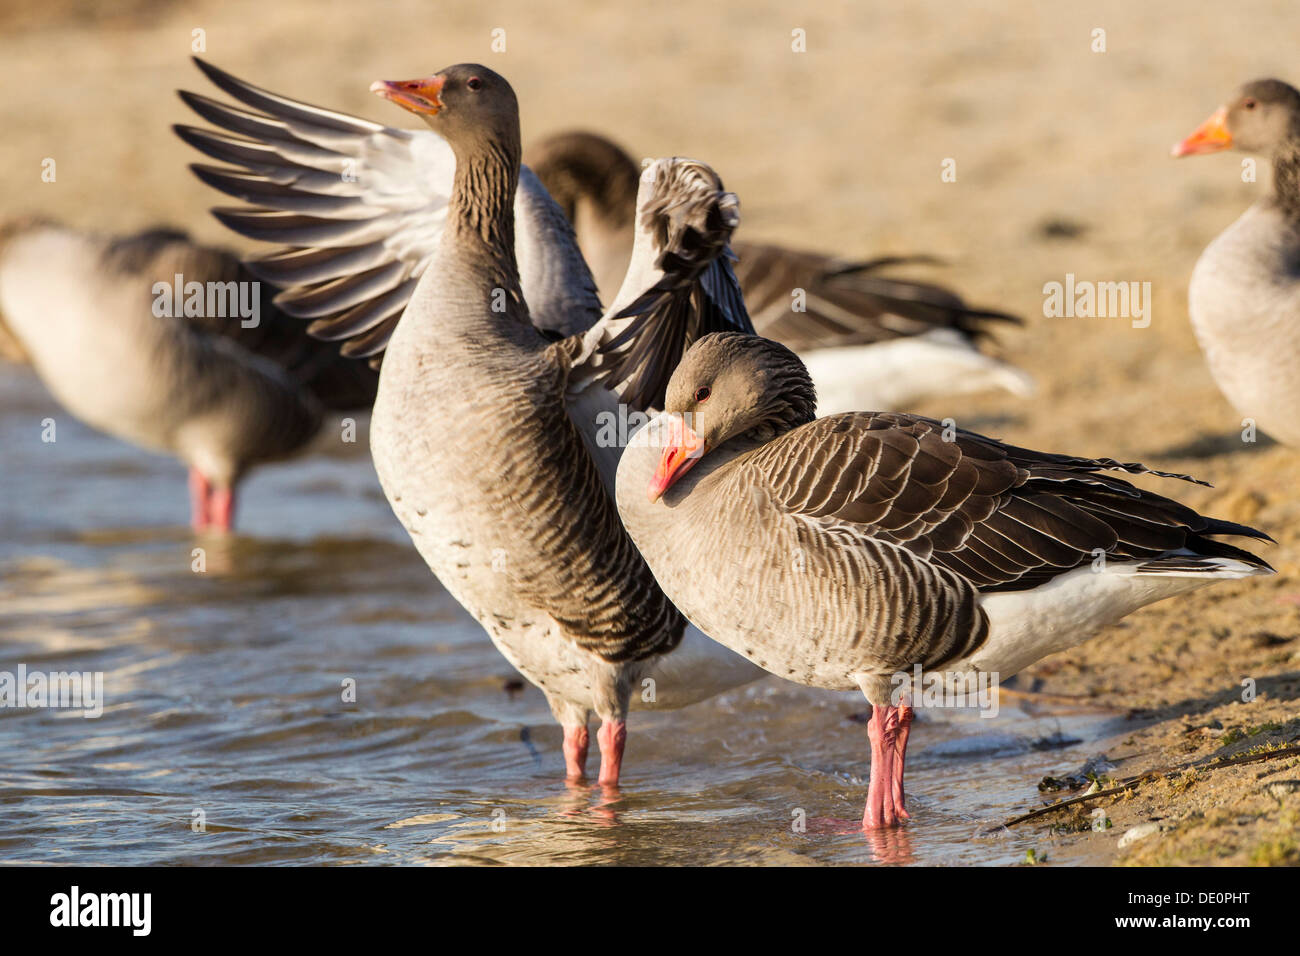 Greylag geese (Anser anser) standing on the bank of a lake, Kassel, Hesse Stock Photo